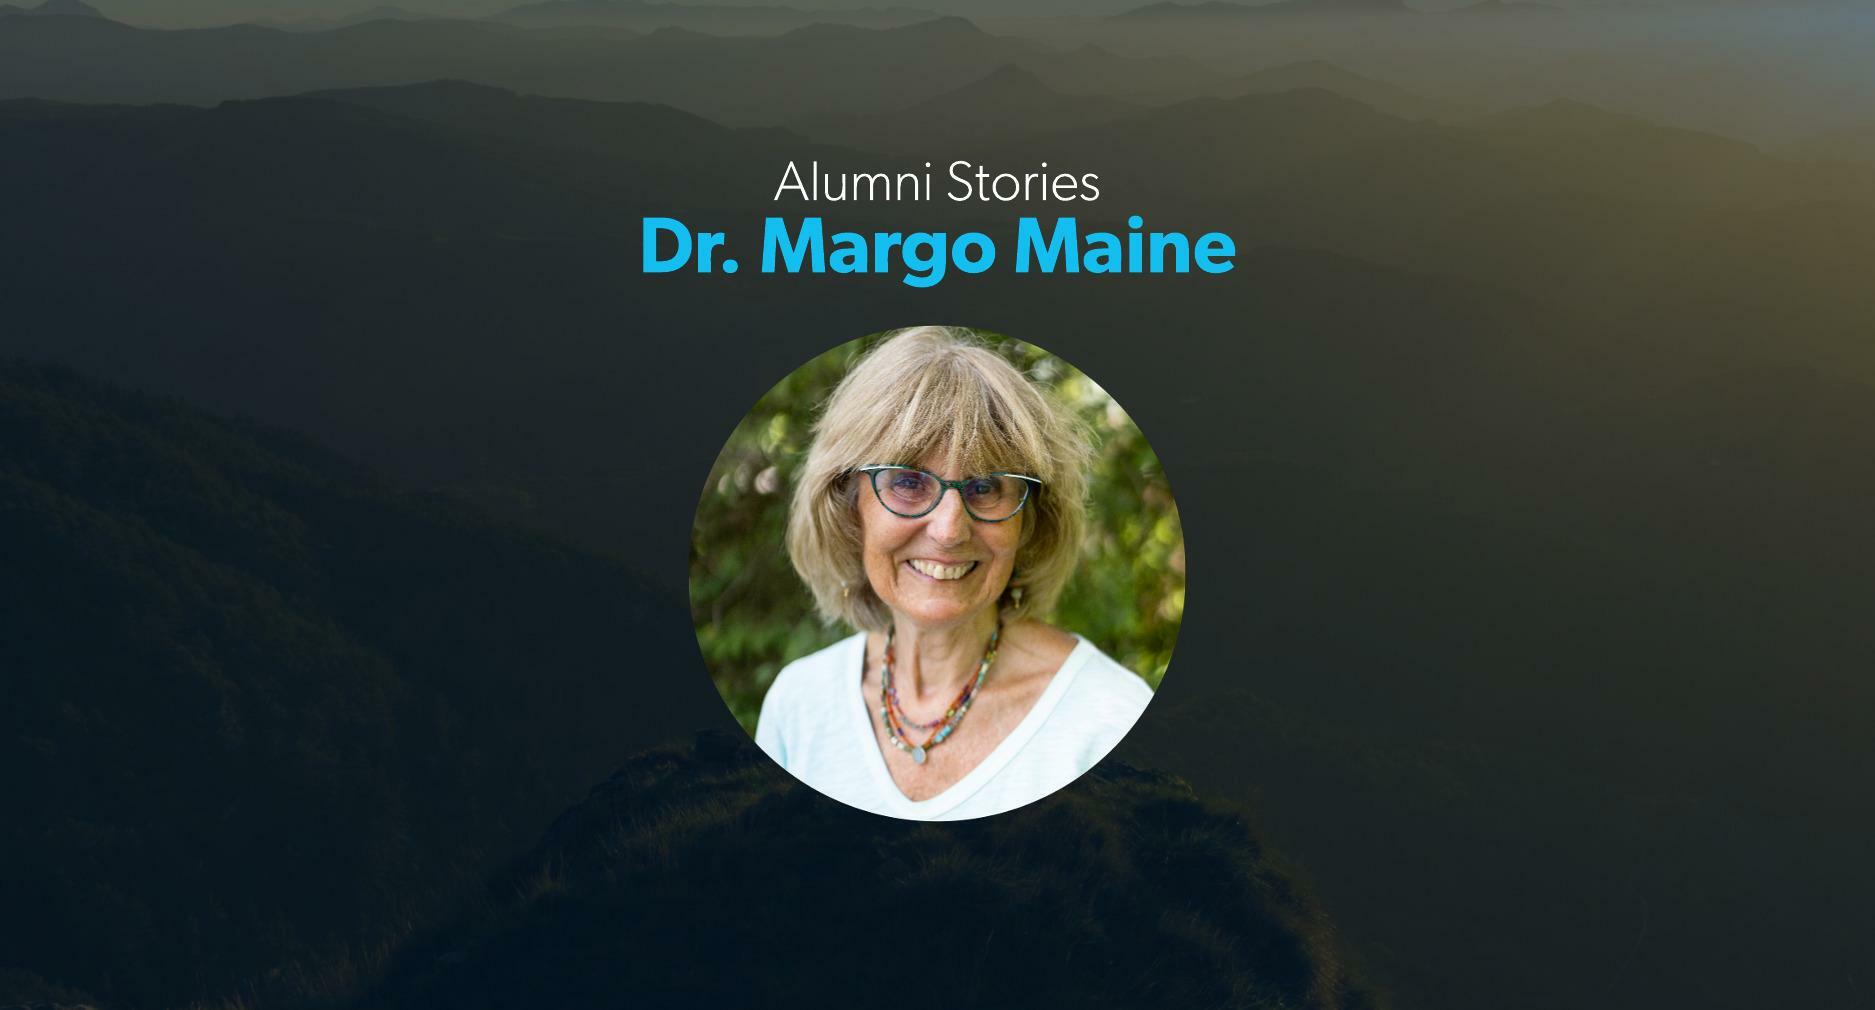 Dr. Margo Maine smiles in a profile photo inset on a banner image under text displaying her name.